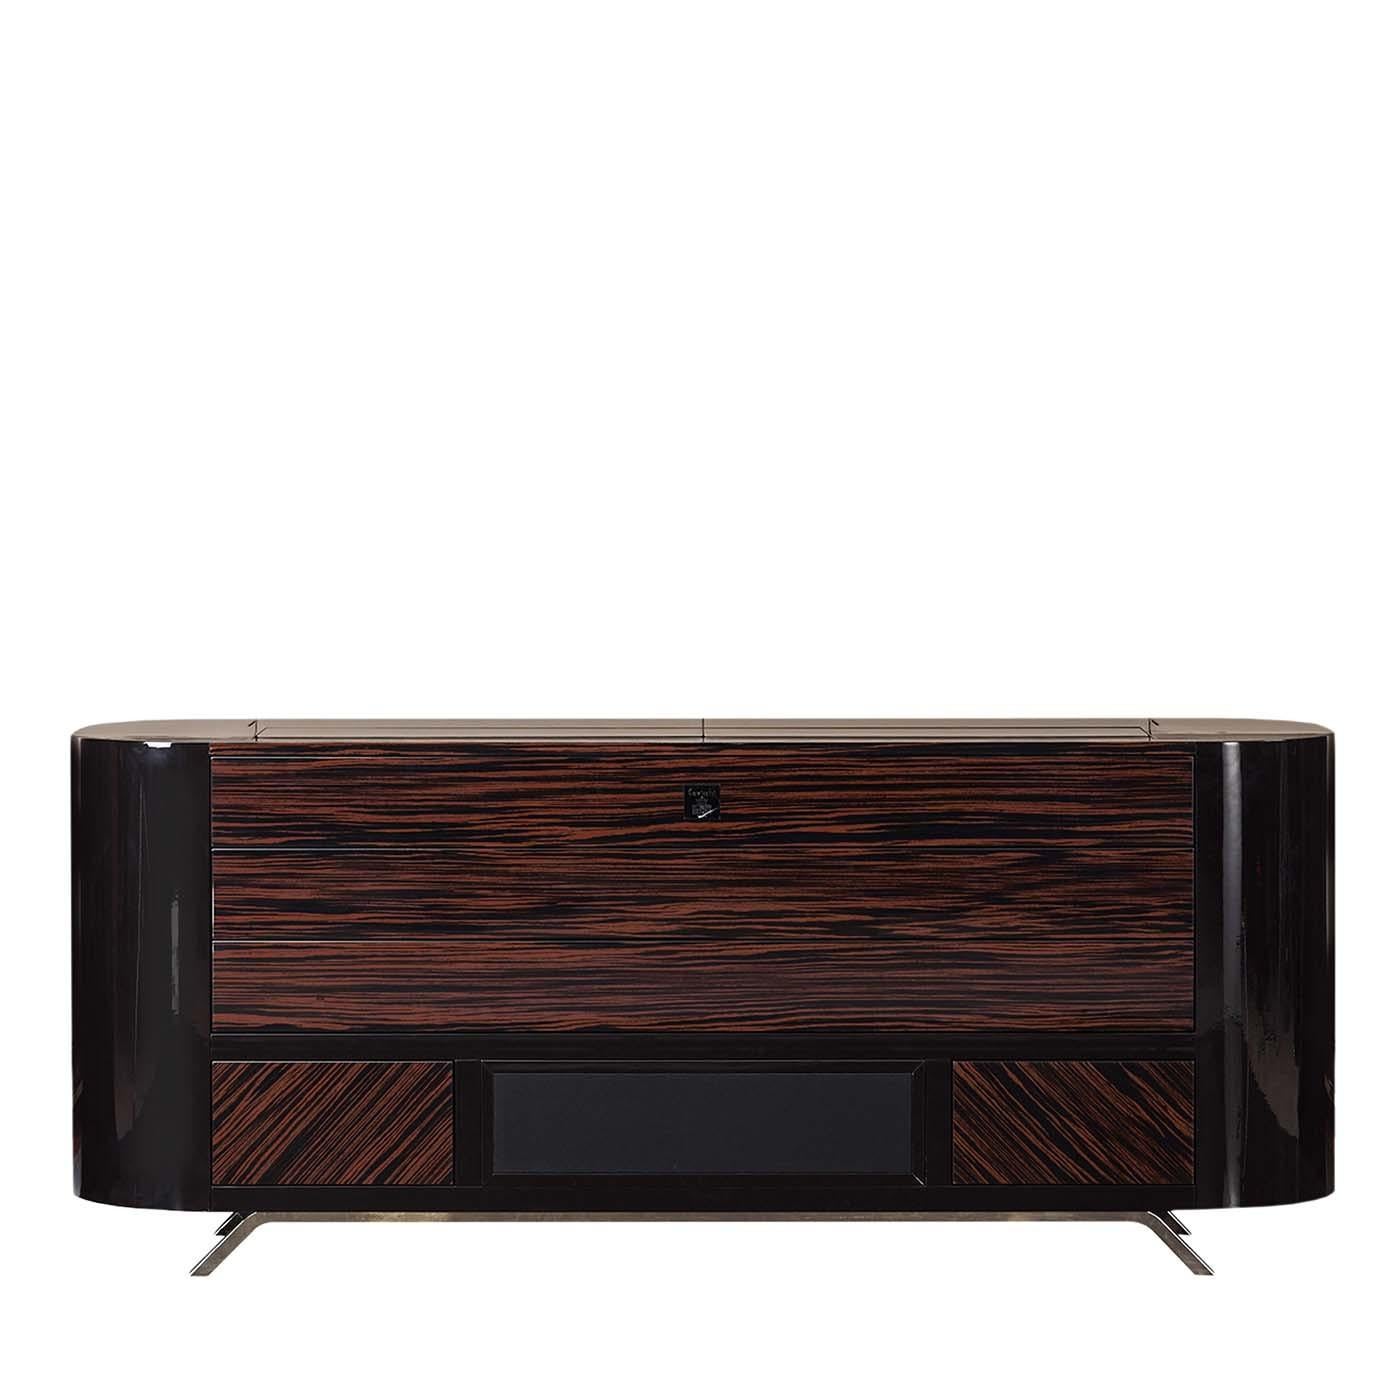 This elegant sideboard in glossy Makassar ebony, dedicated to the world of billiard and cigars, presents prestigious solutions both in manufacturing and design. It is equipped with compartments, drawers, a Bose minimal soundbar system, a multimedia